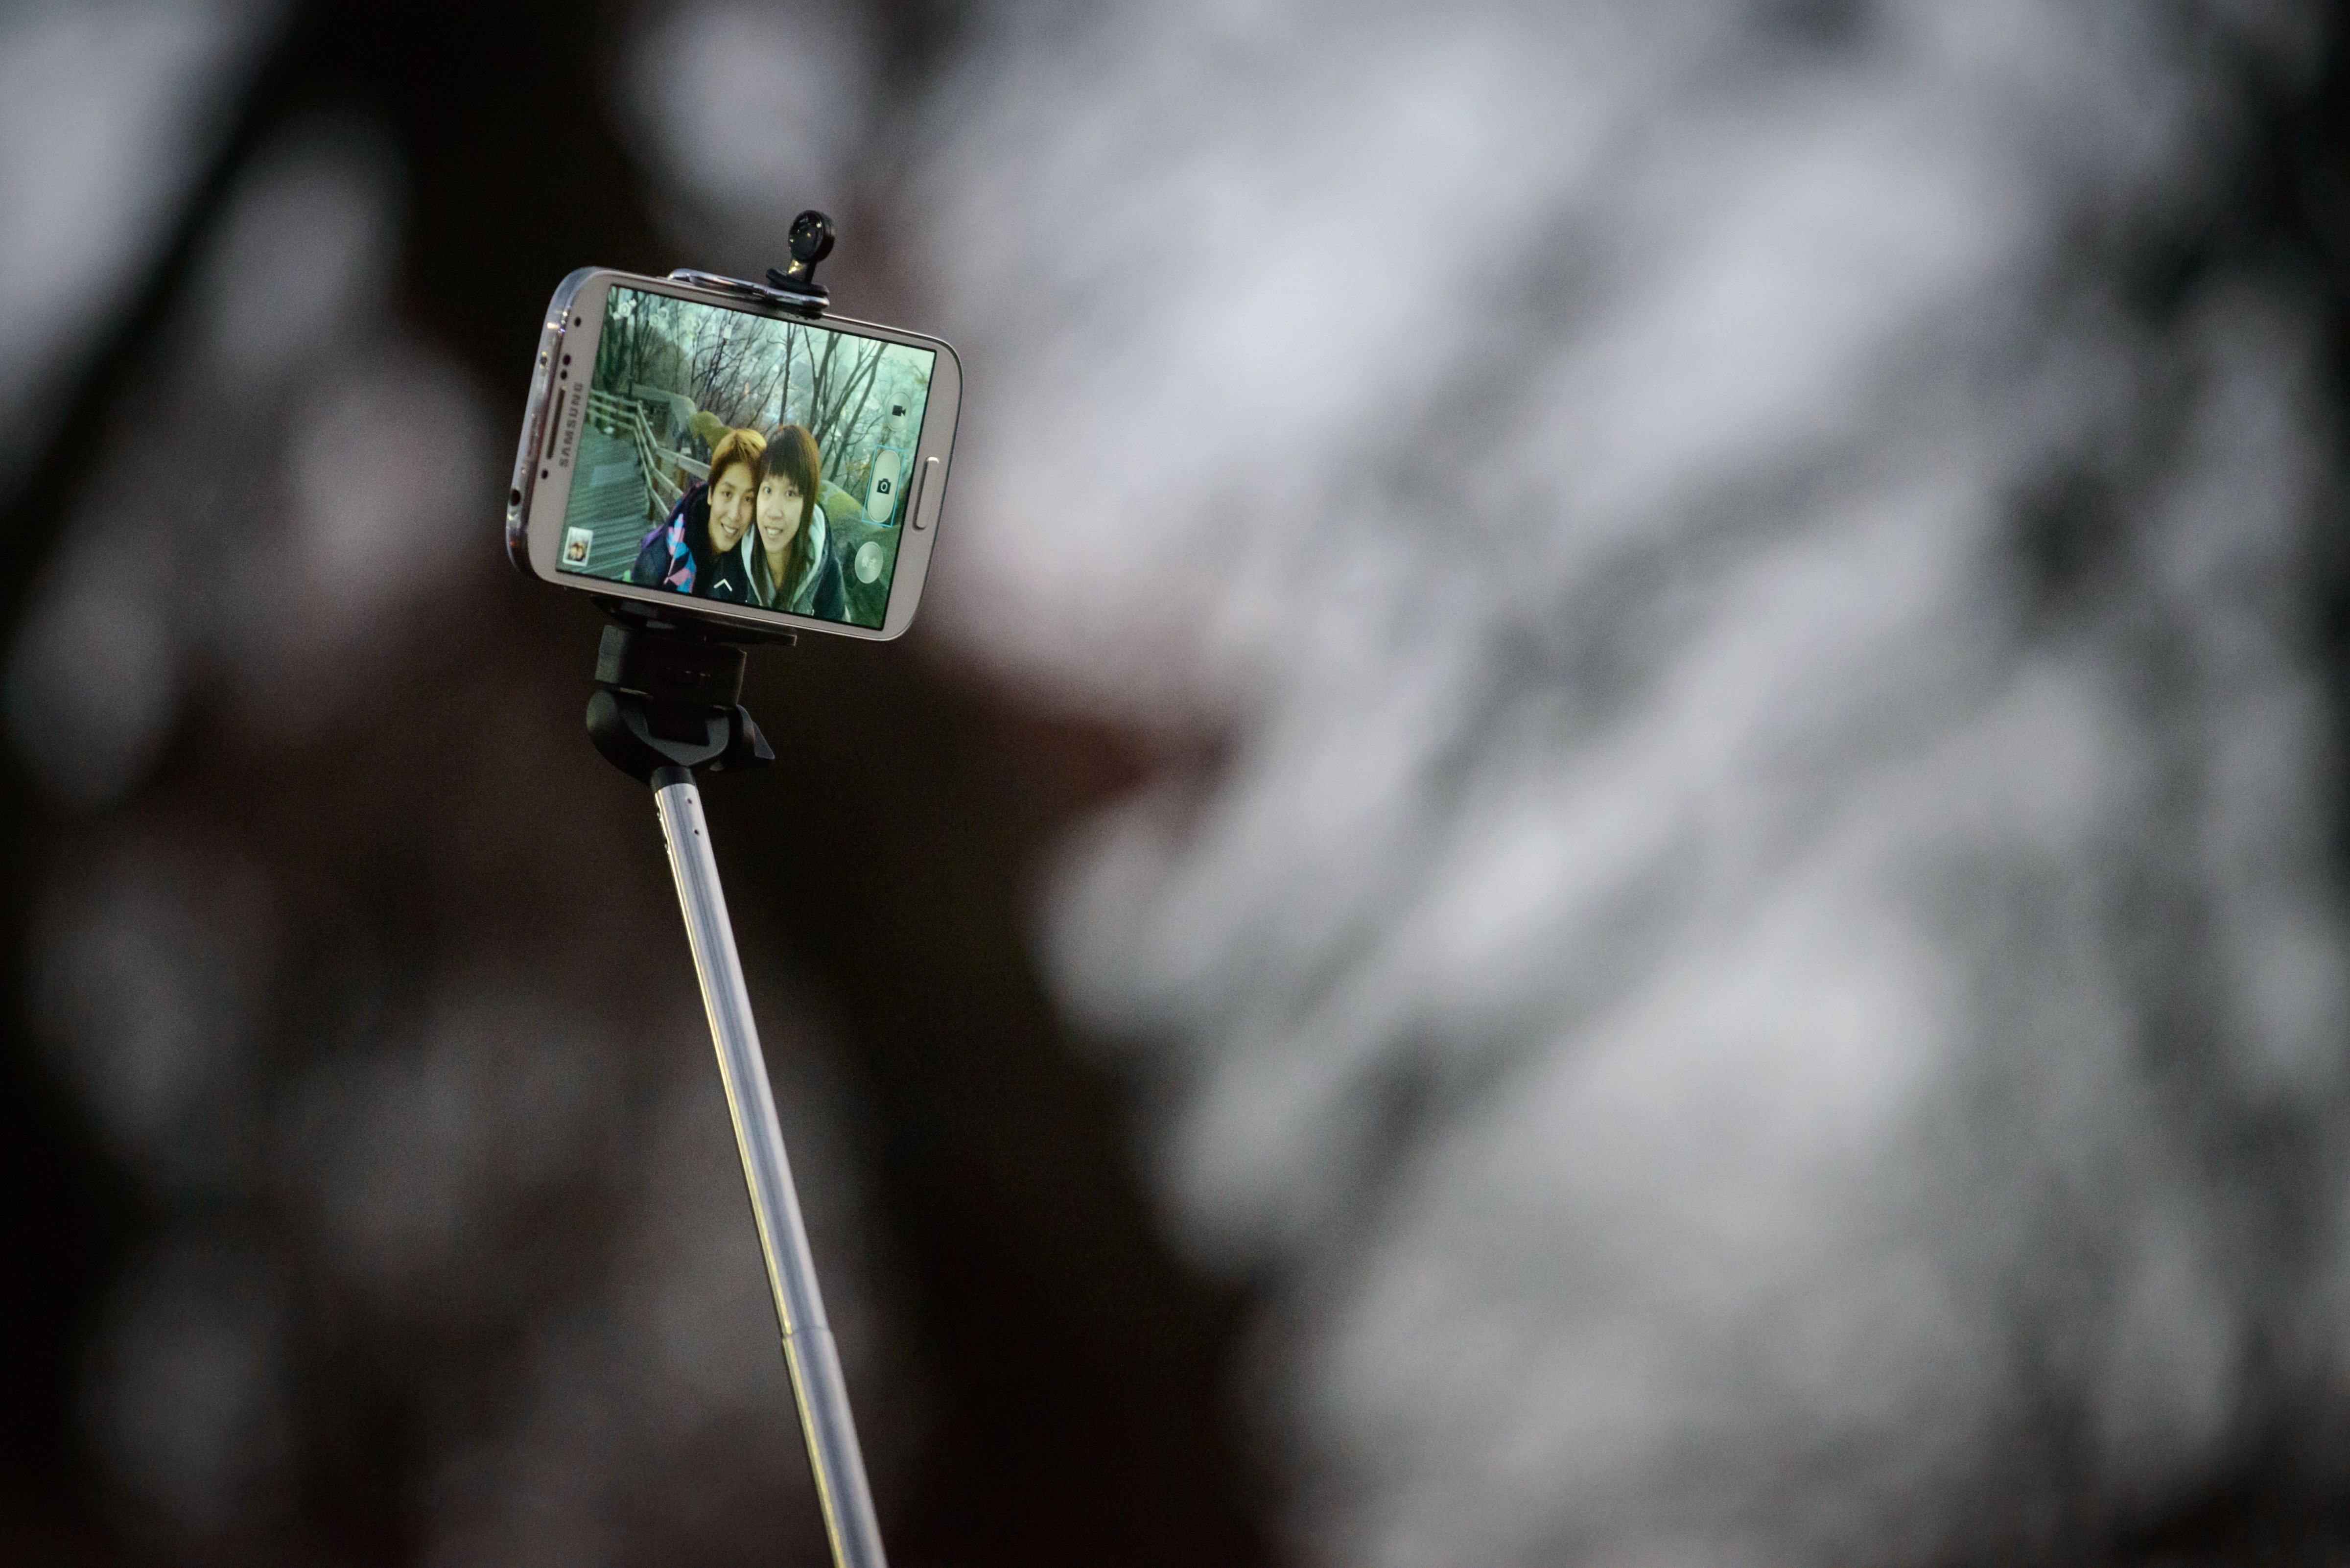 A couple use a 'selfie stick' to take a photo at a popular tourist spot in Seoul on Nov. 26, 2014. (Ed Jones—AFP/Getty Images)